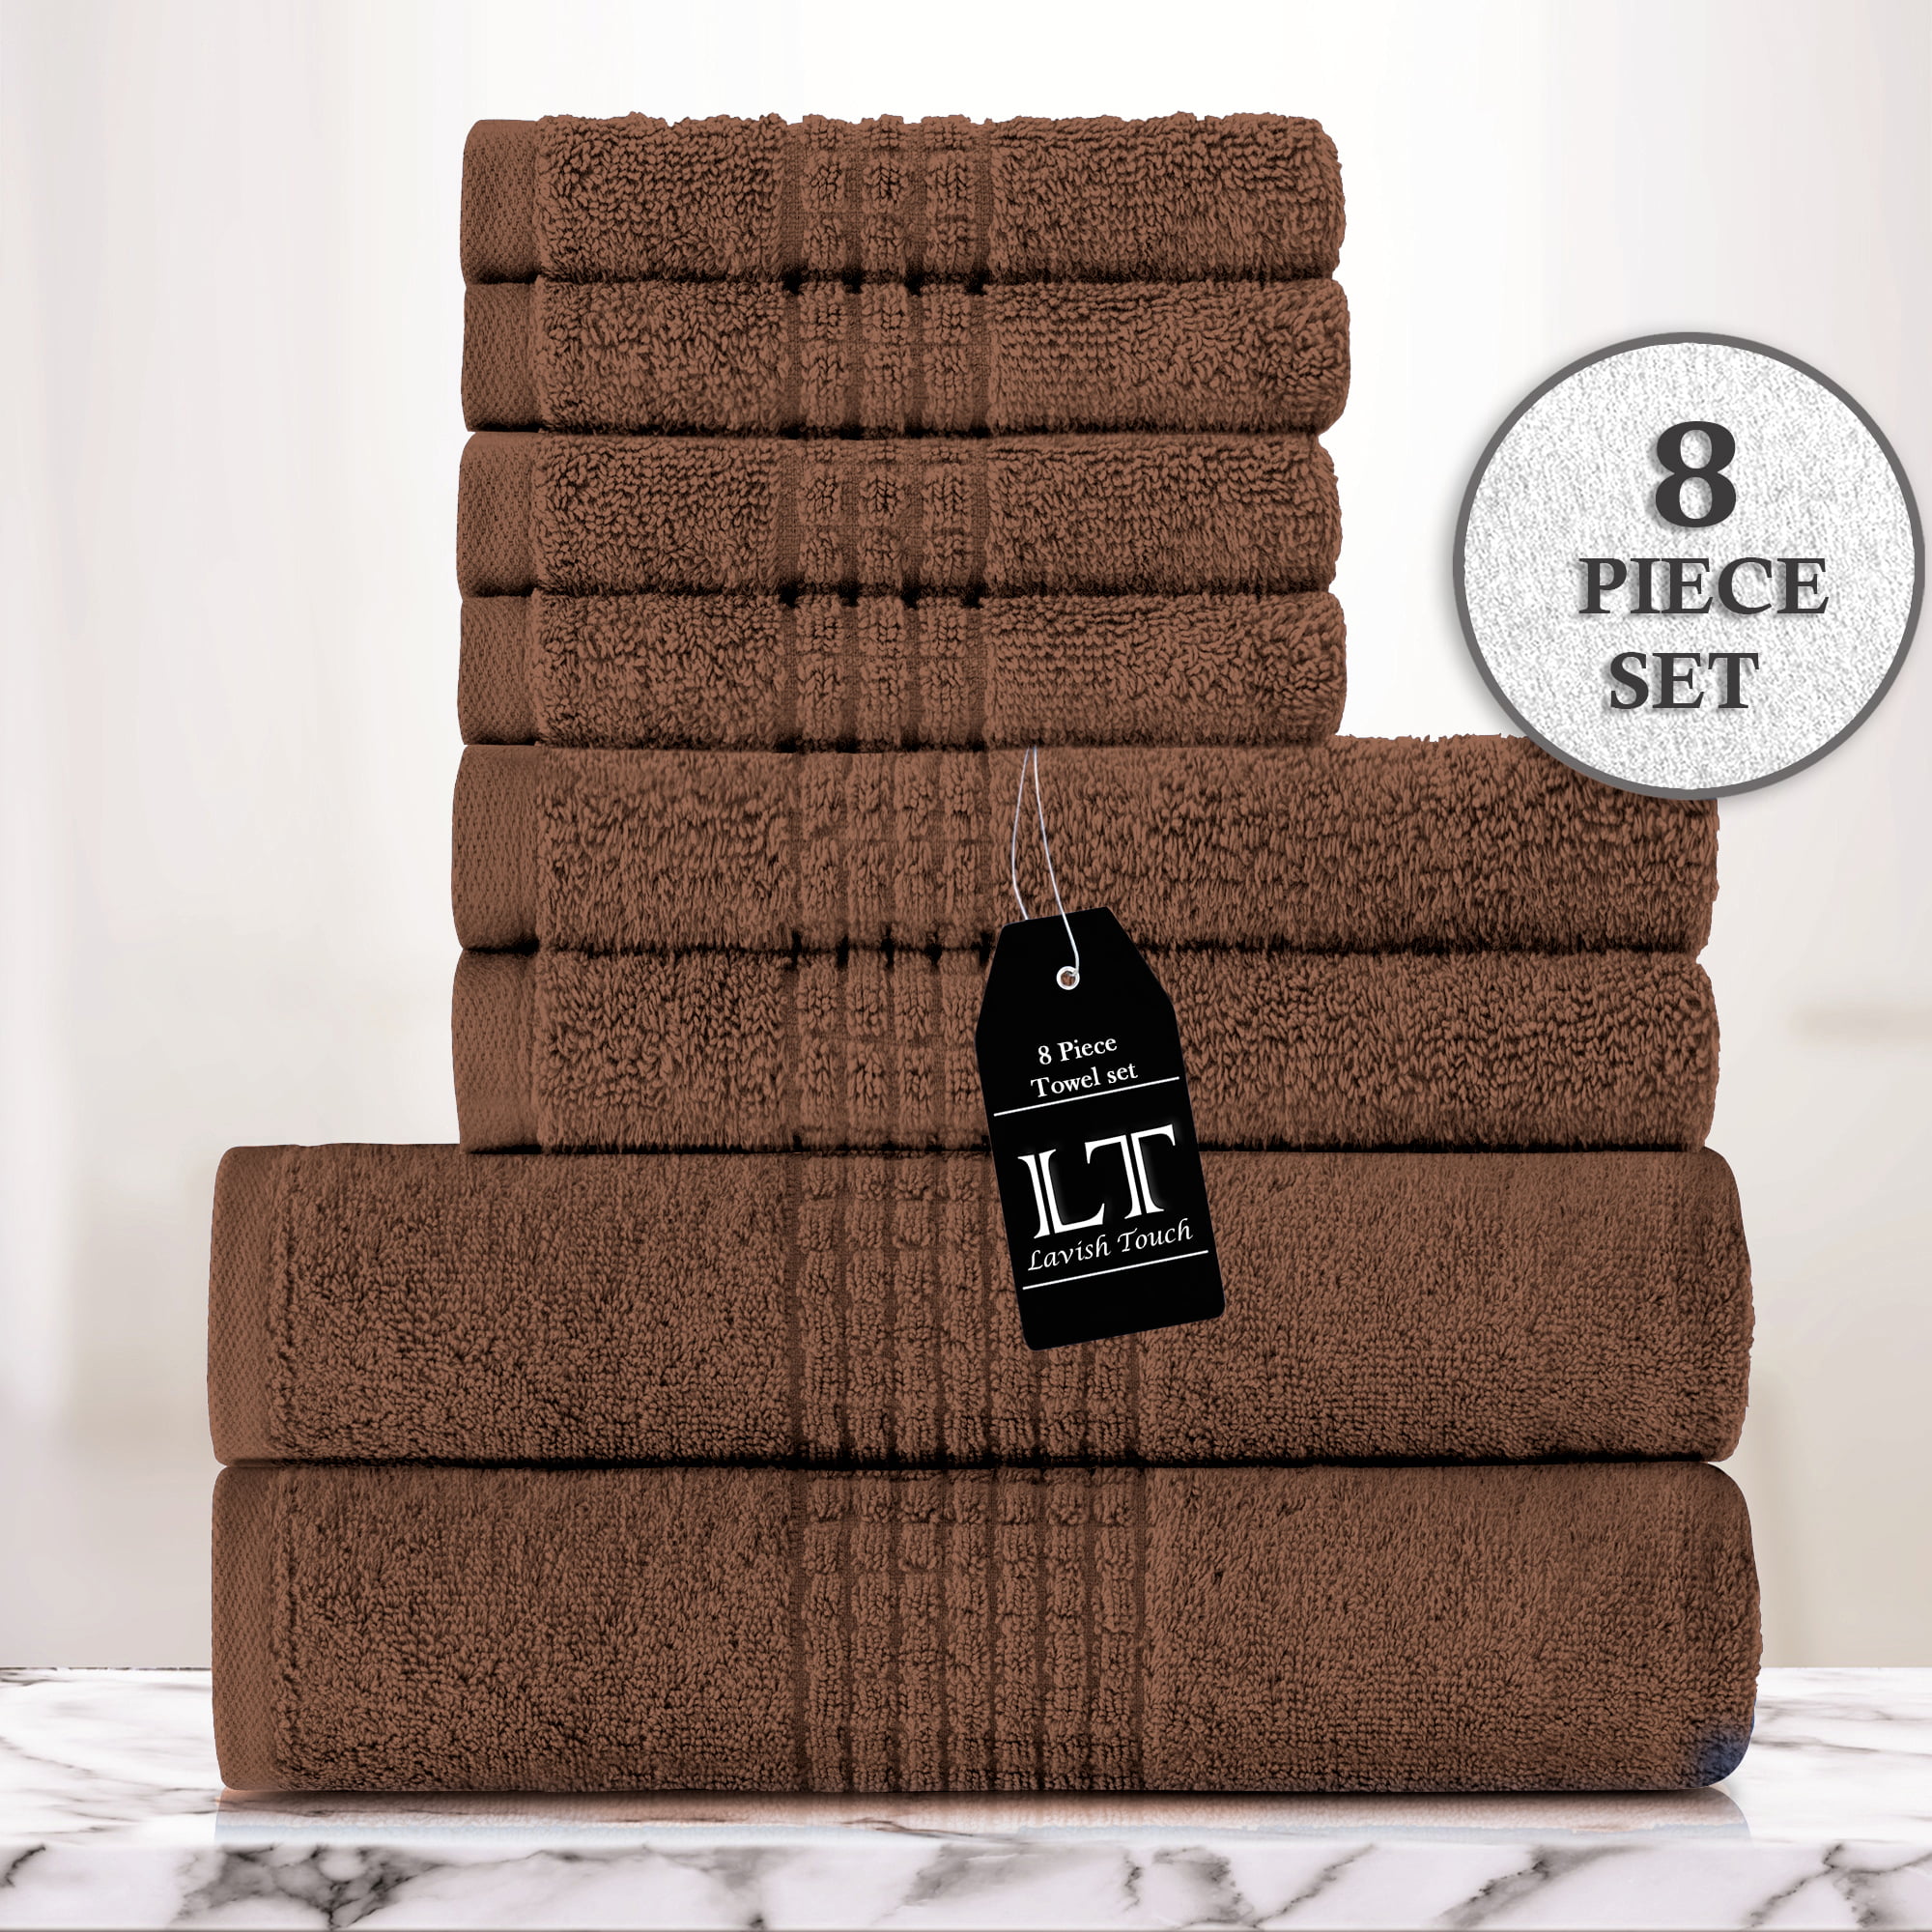 6x Bathroom Towel Set Super Soft Cotton Highly Absorbent 700GSM SPA Luxury Hotel 